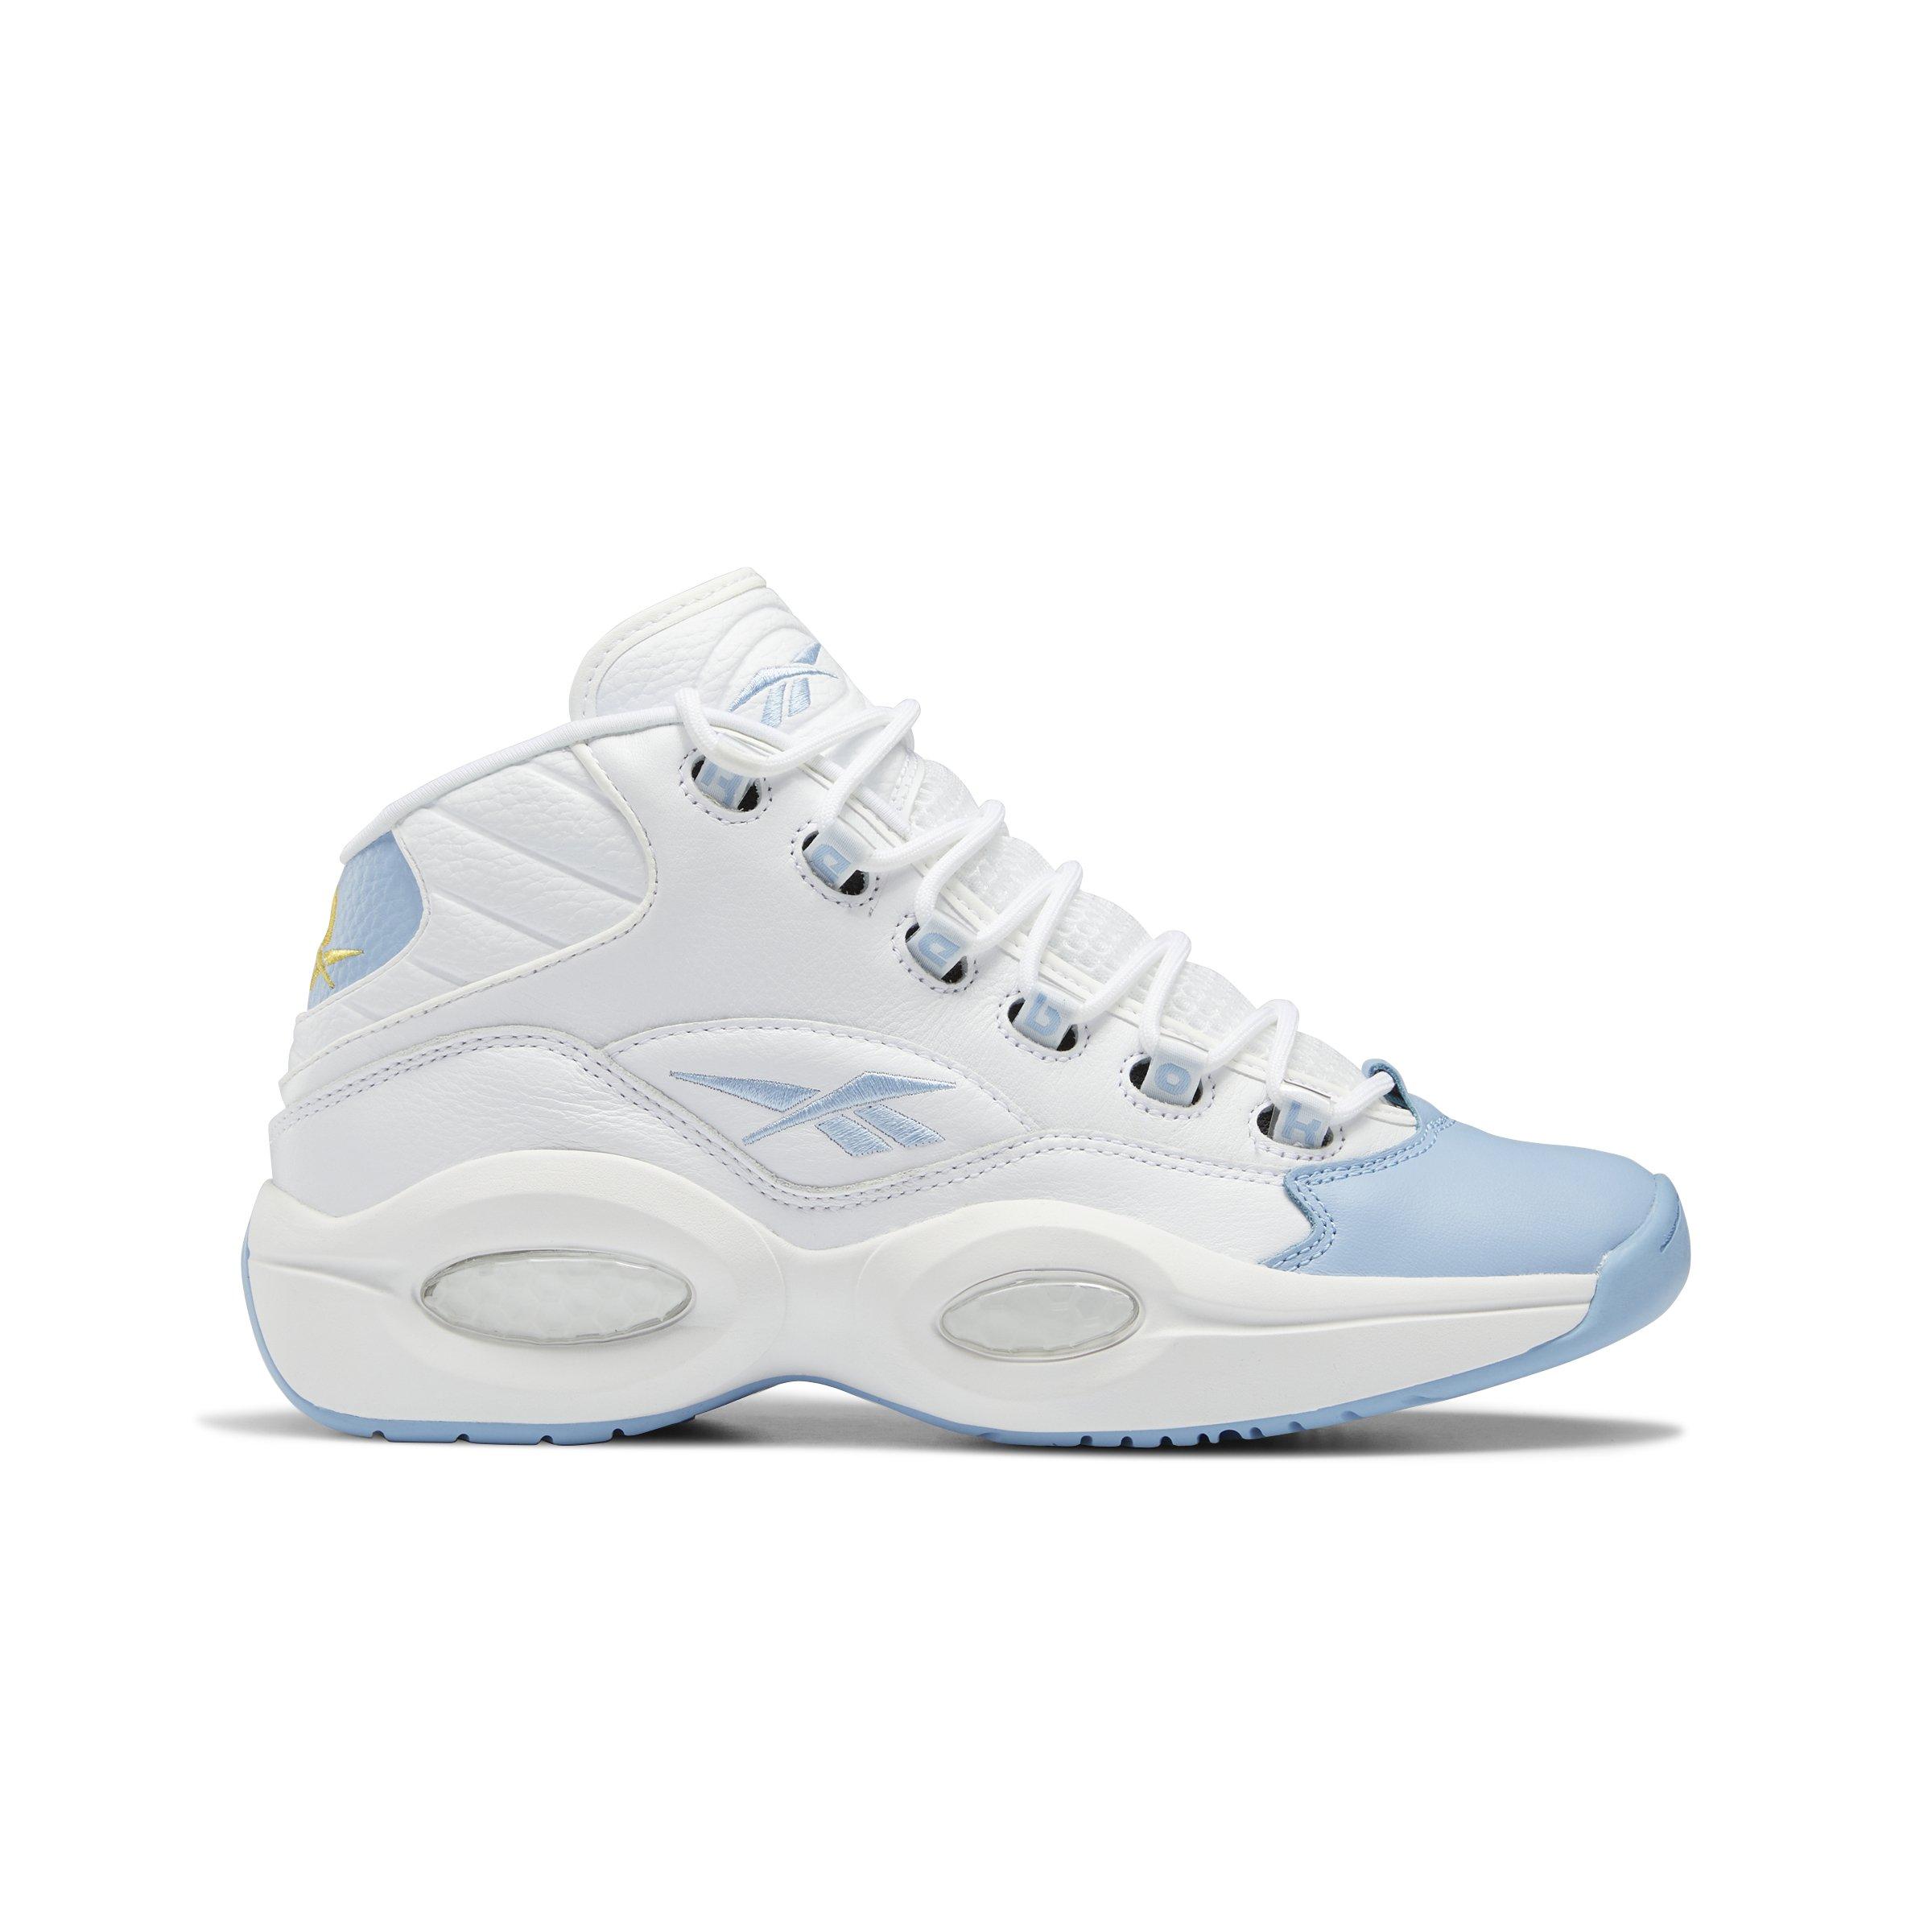 Blue Toe' Reebok Question Mids Available Early